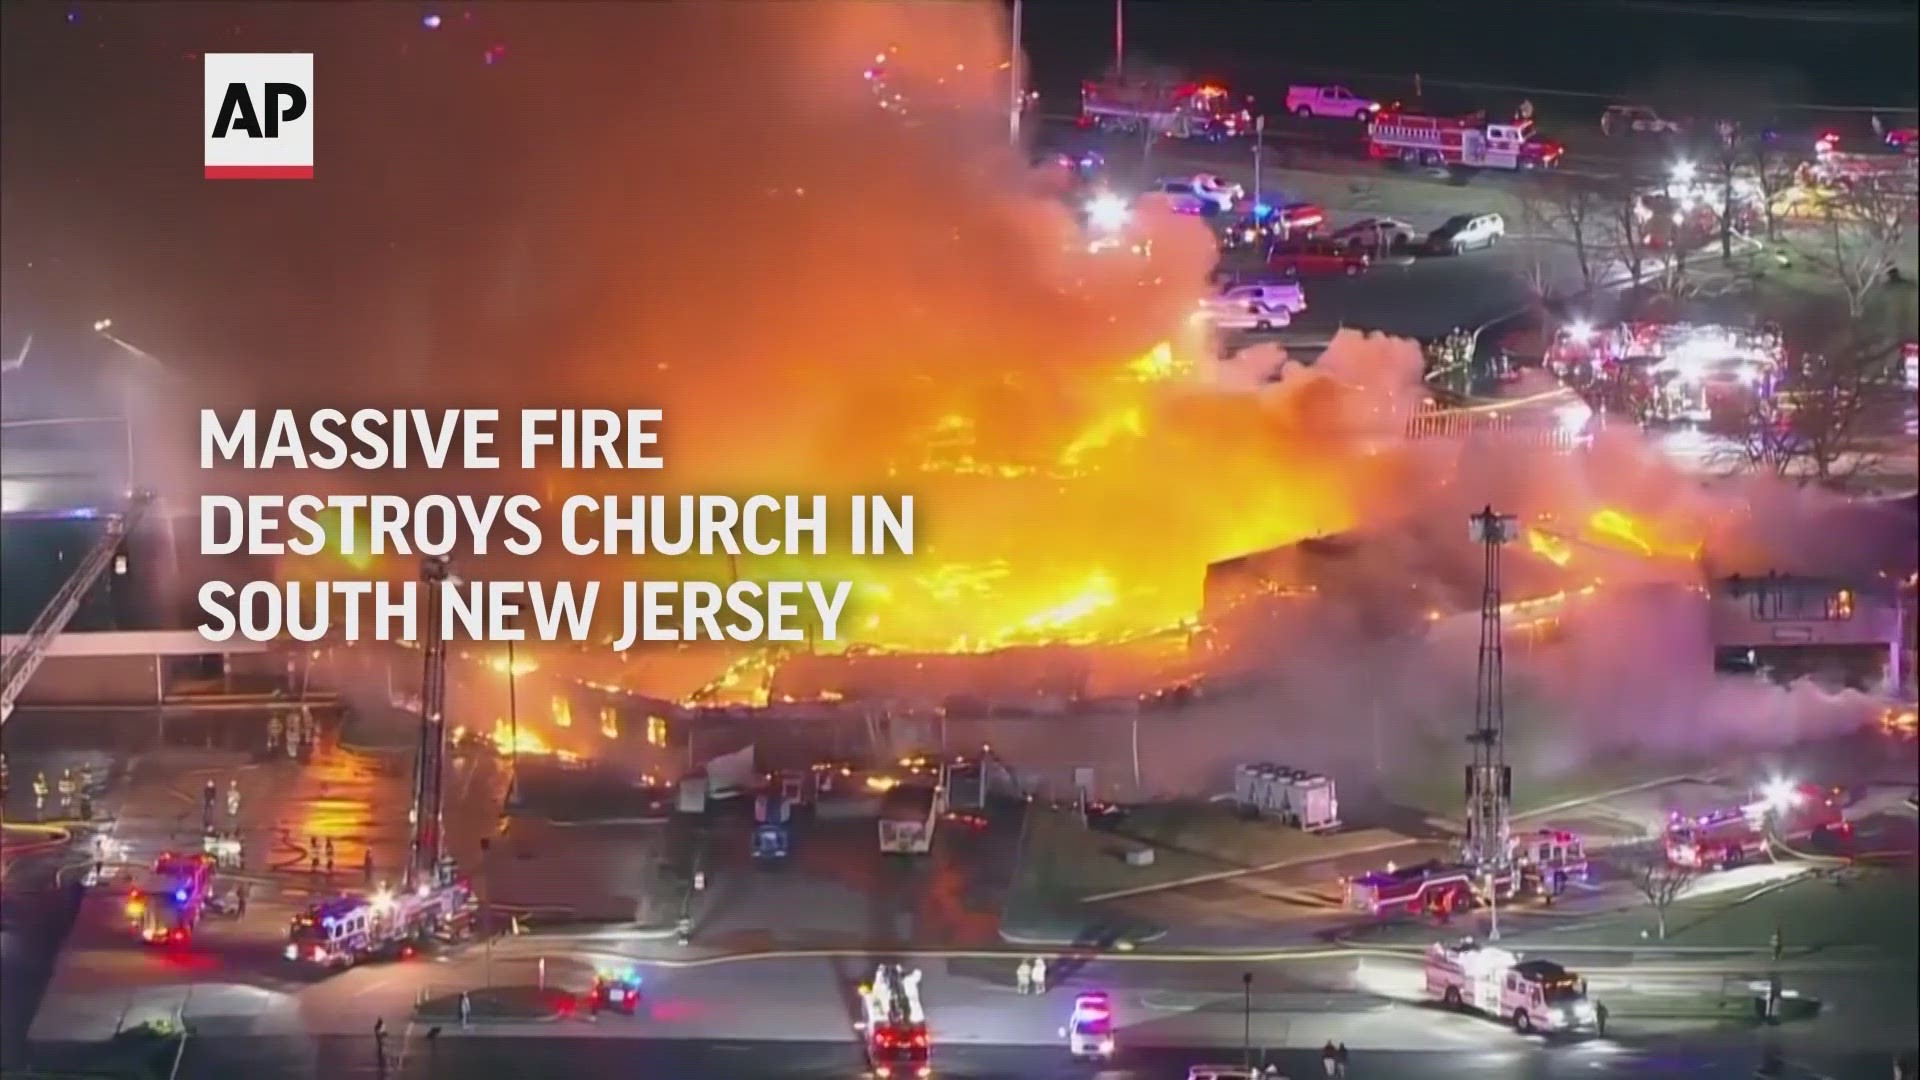 Video showed the Fountain of Life Center in Florence Township engulfed in flames Monday night.